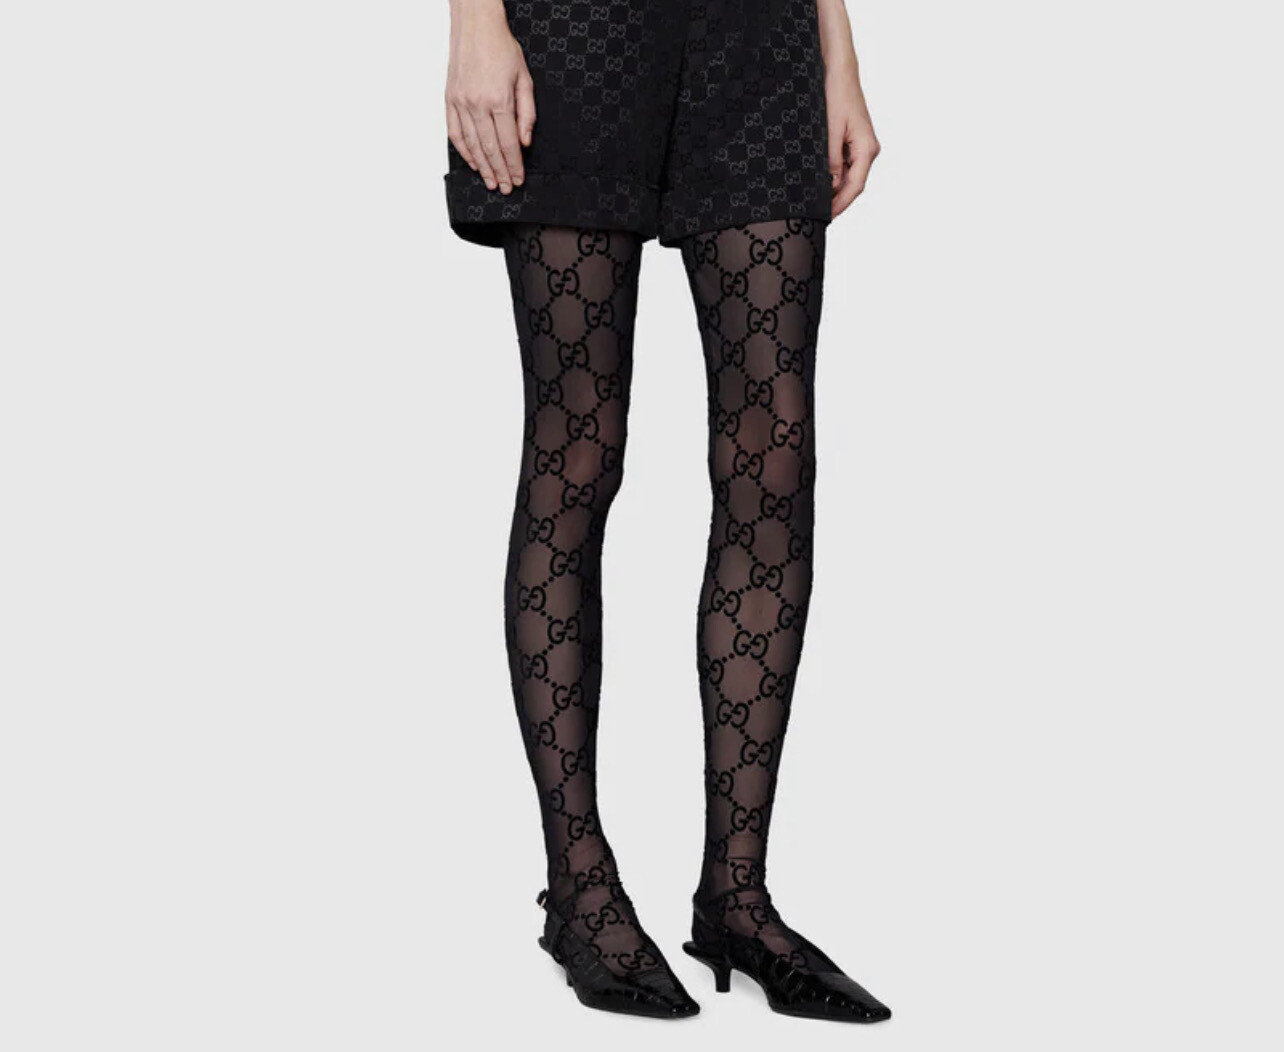 Gucci Tights, Black, New in Package - Julia Rose Boston